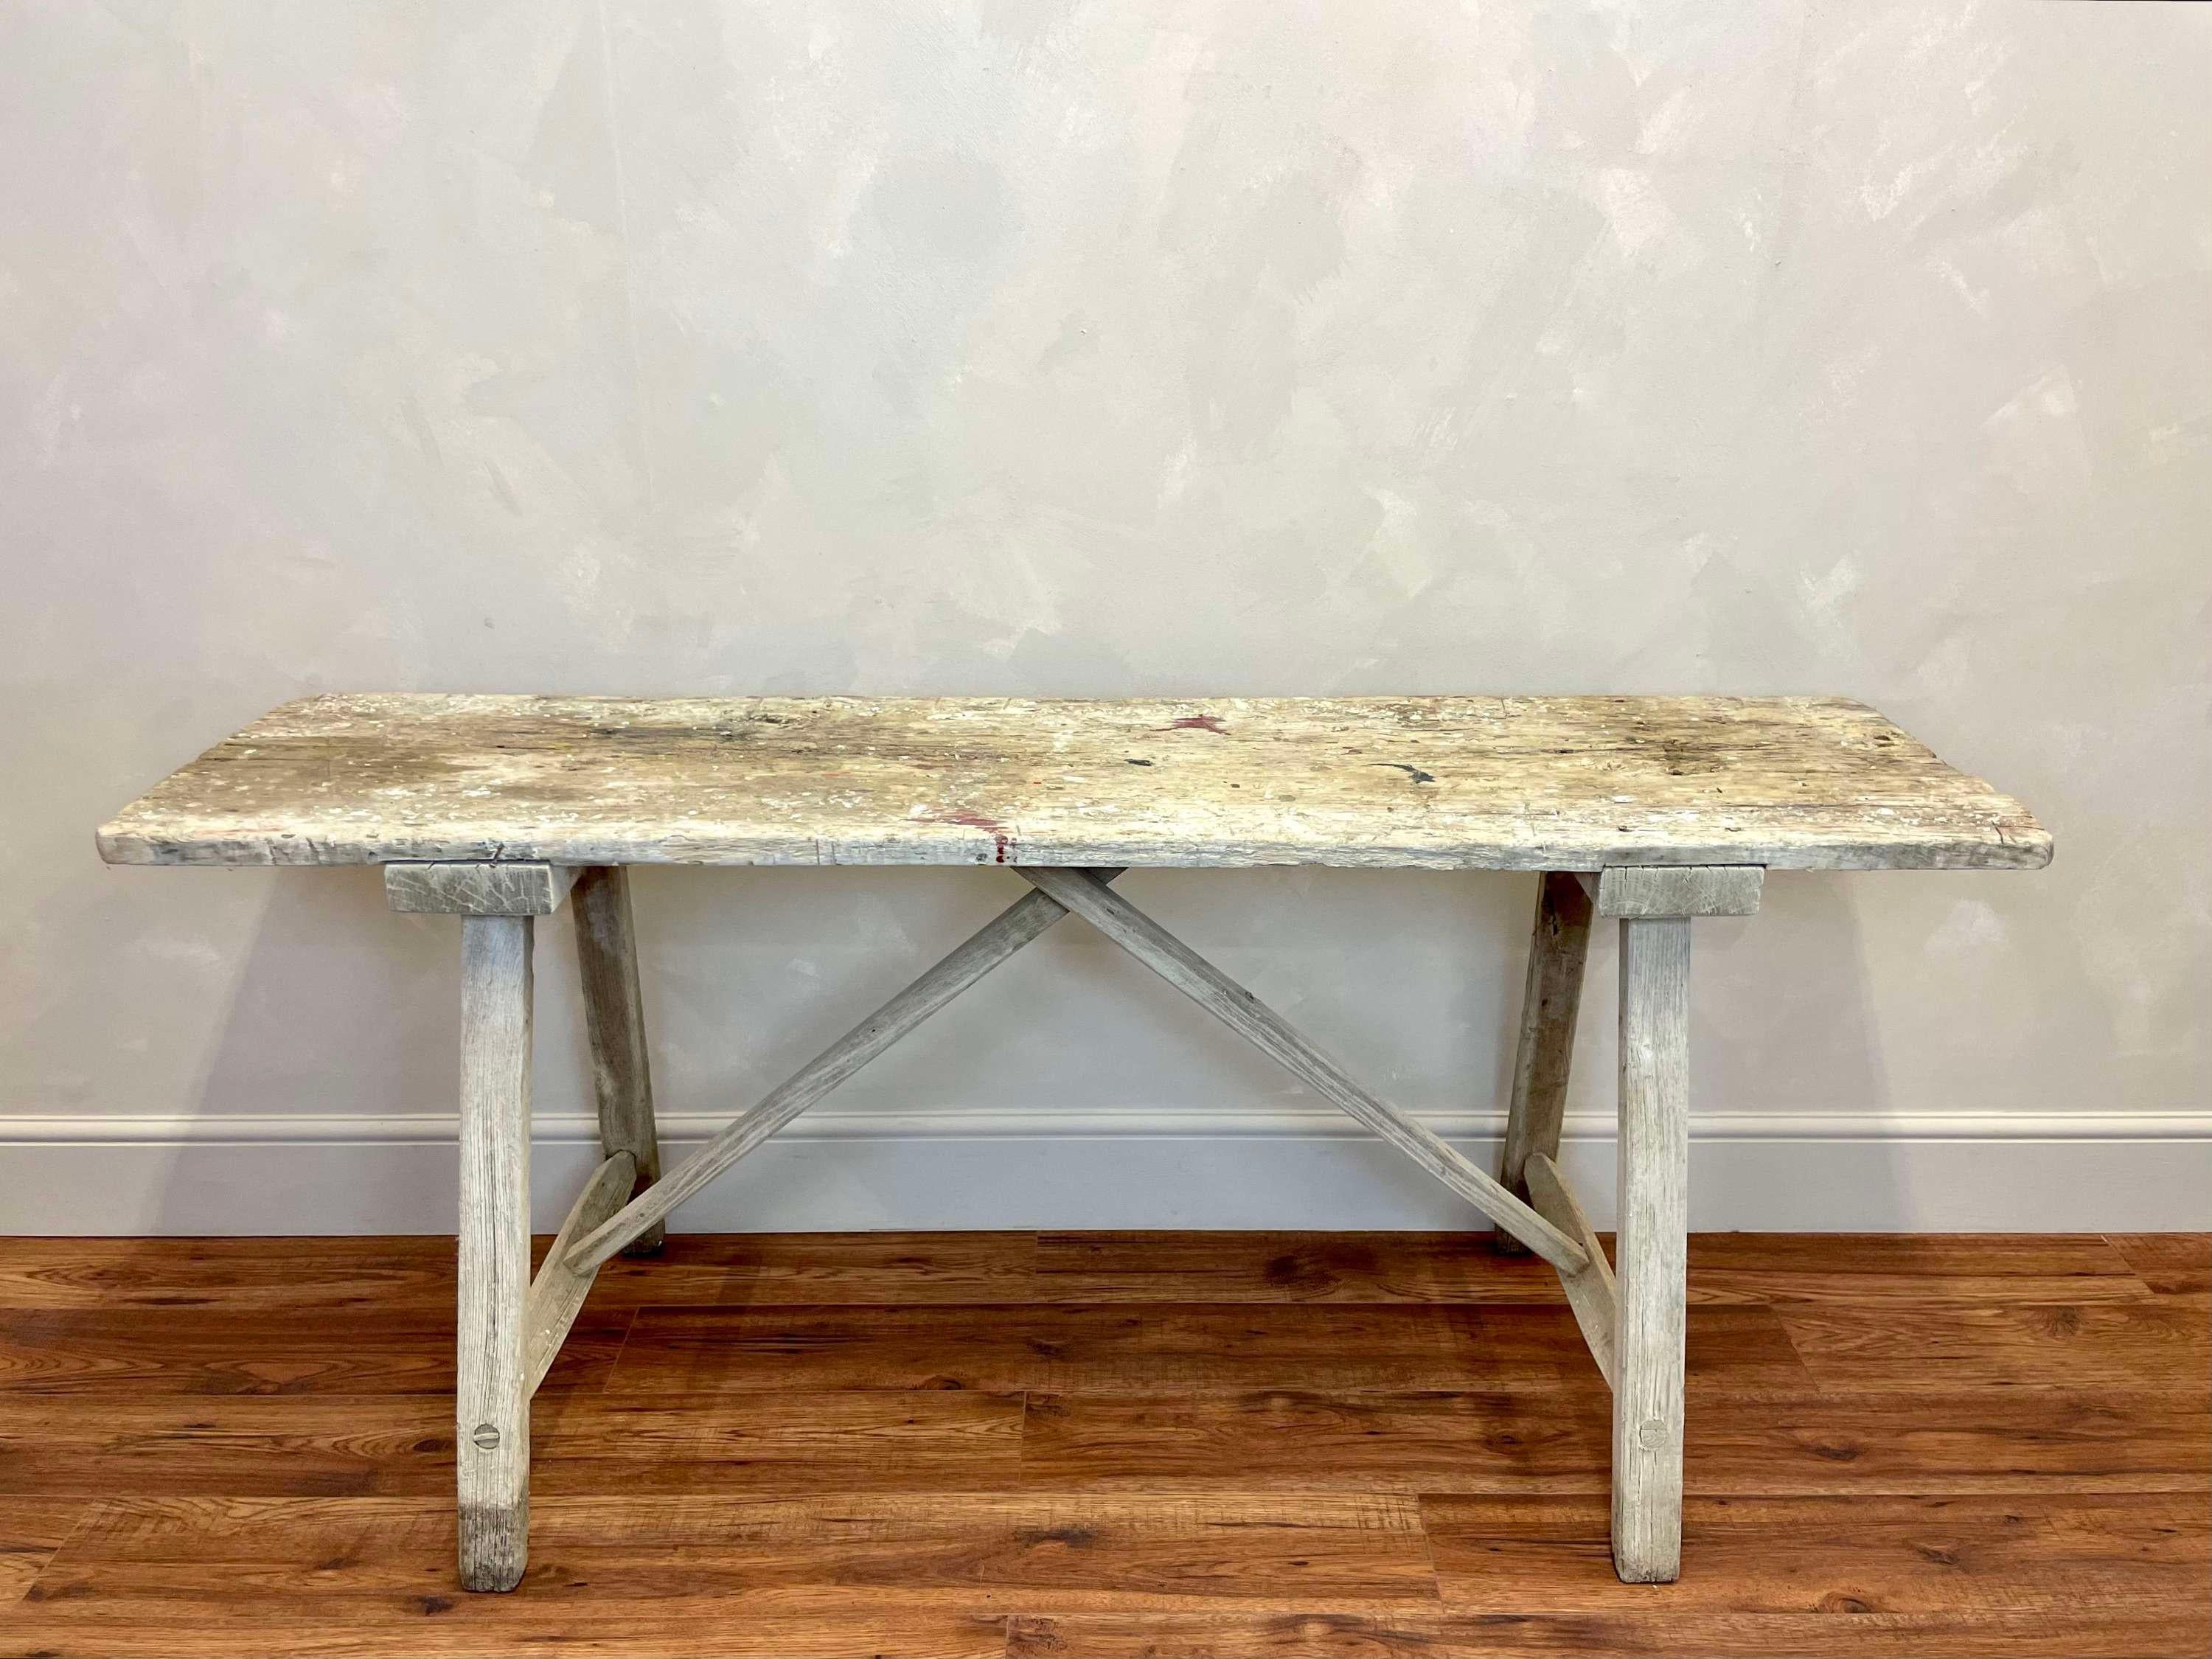 French primitive, early 20th c workbench.
Usually used as laundry benches, this one has possibly been used in a workshop, so has some great wear and pretty paint splatters.
This piece would look amazing as a console or behind a sofa with lamps and